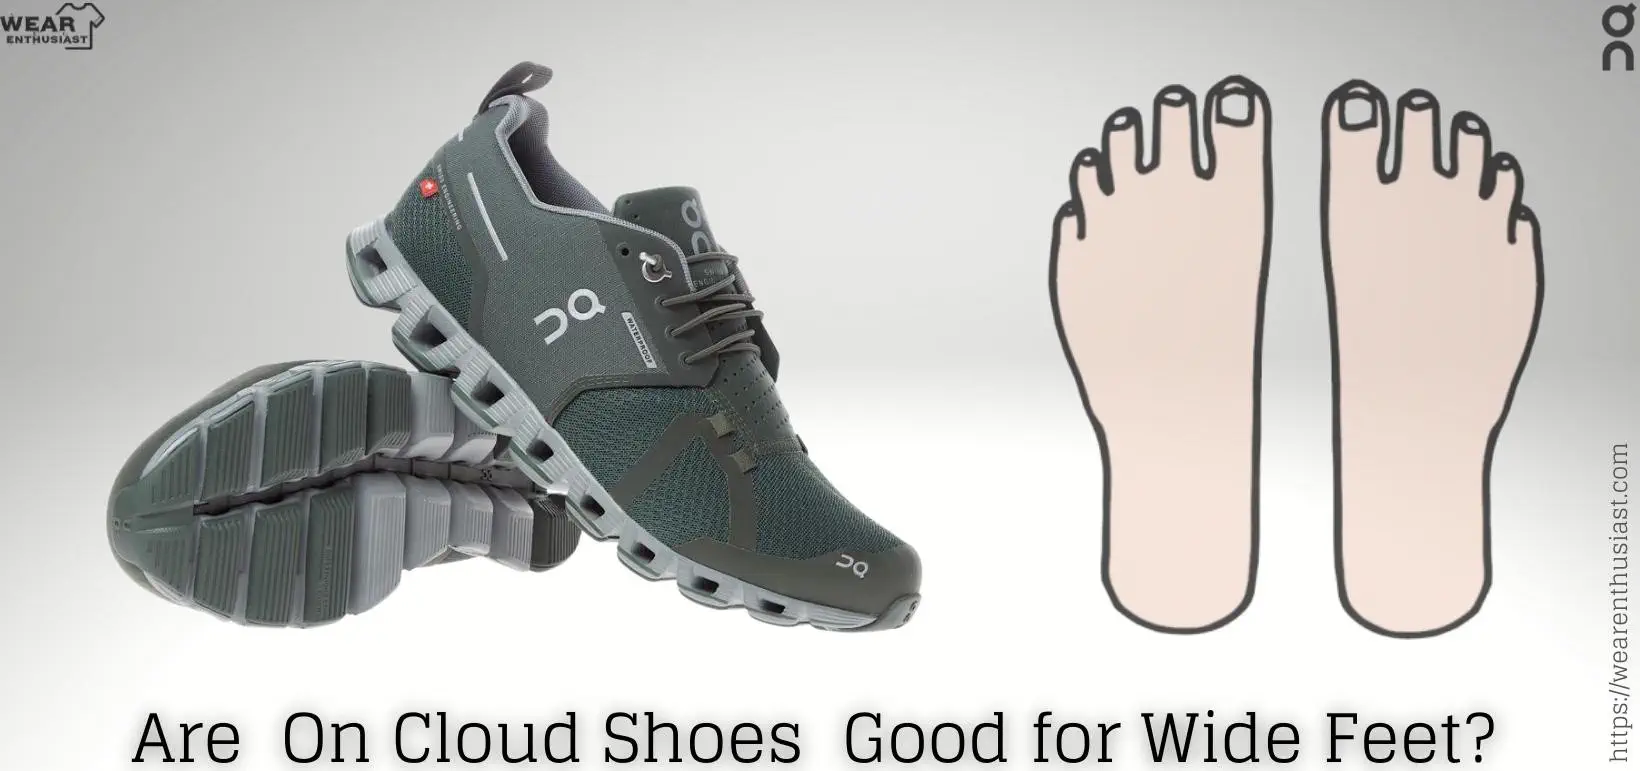 Are On Cloud shoes good for wide feet?